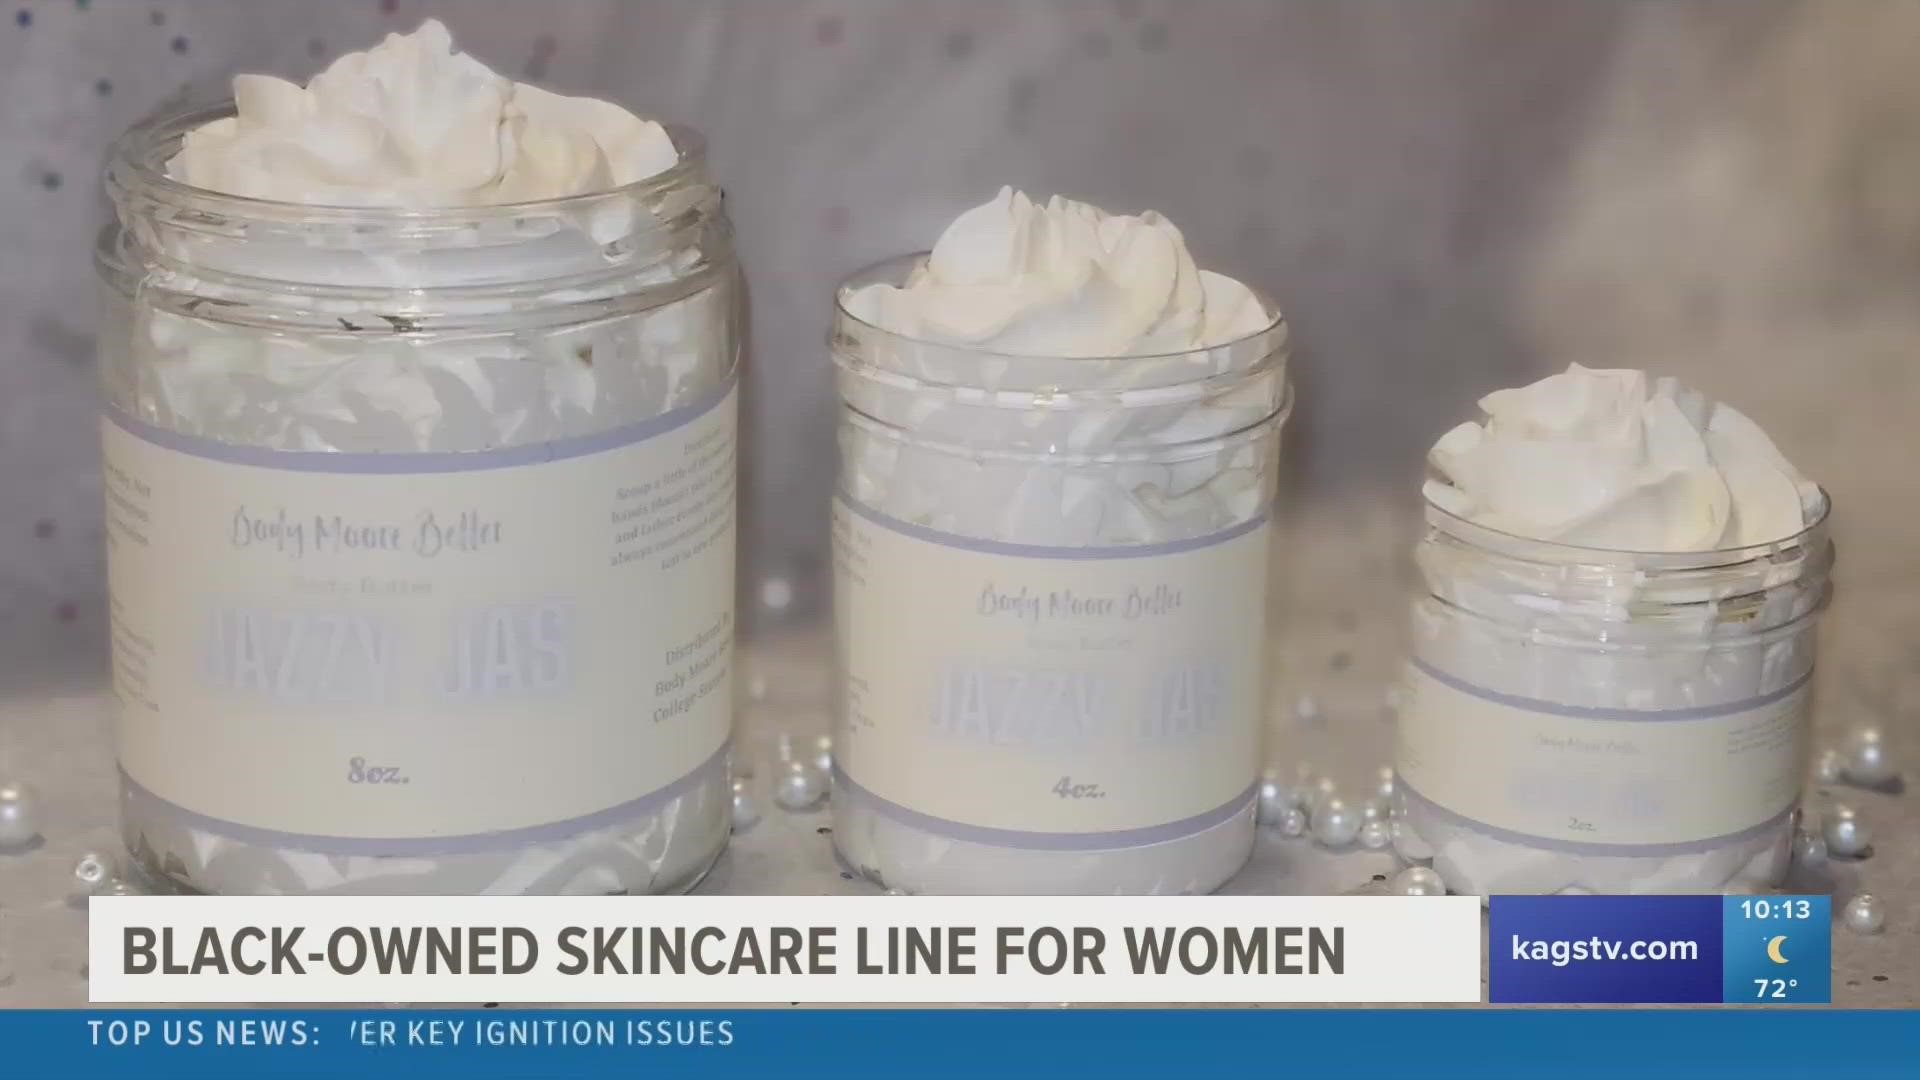 Ashley Moore, a BCS native, is developing her own skincare products from the inspiration to combat a condition that ran in her family for all women of color.